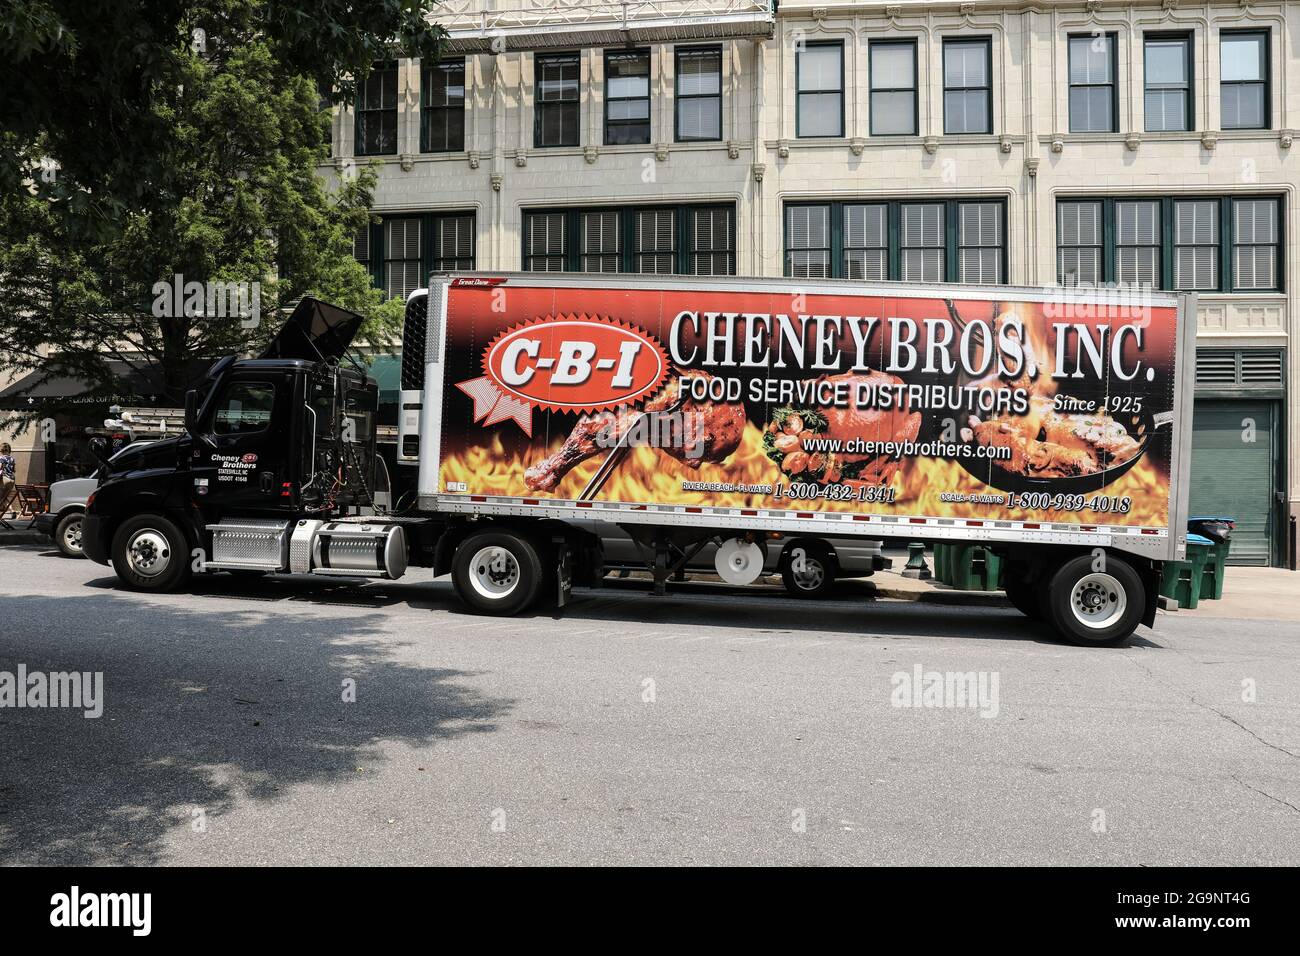 ASHEVILLE, NC, USA-22 JULY 2021: Delivery truck for Cheney Bros. Inc, a restaurant food service distributor, based in Fiviera Beach, Florida. Stock Photo